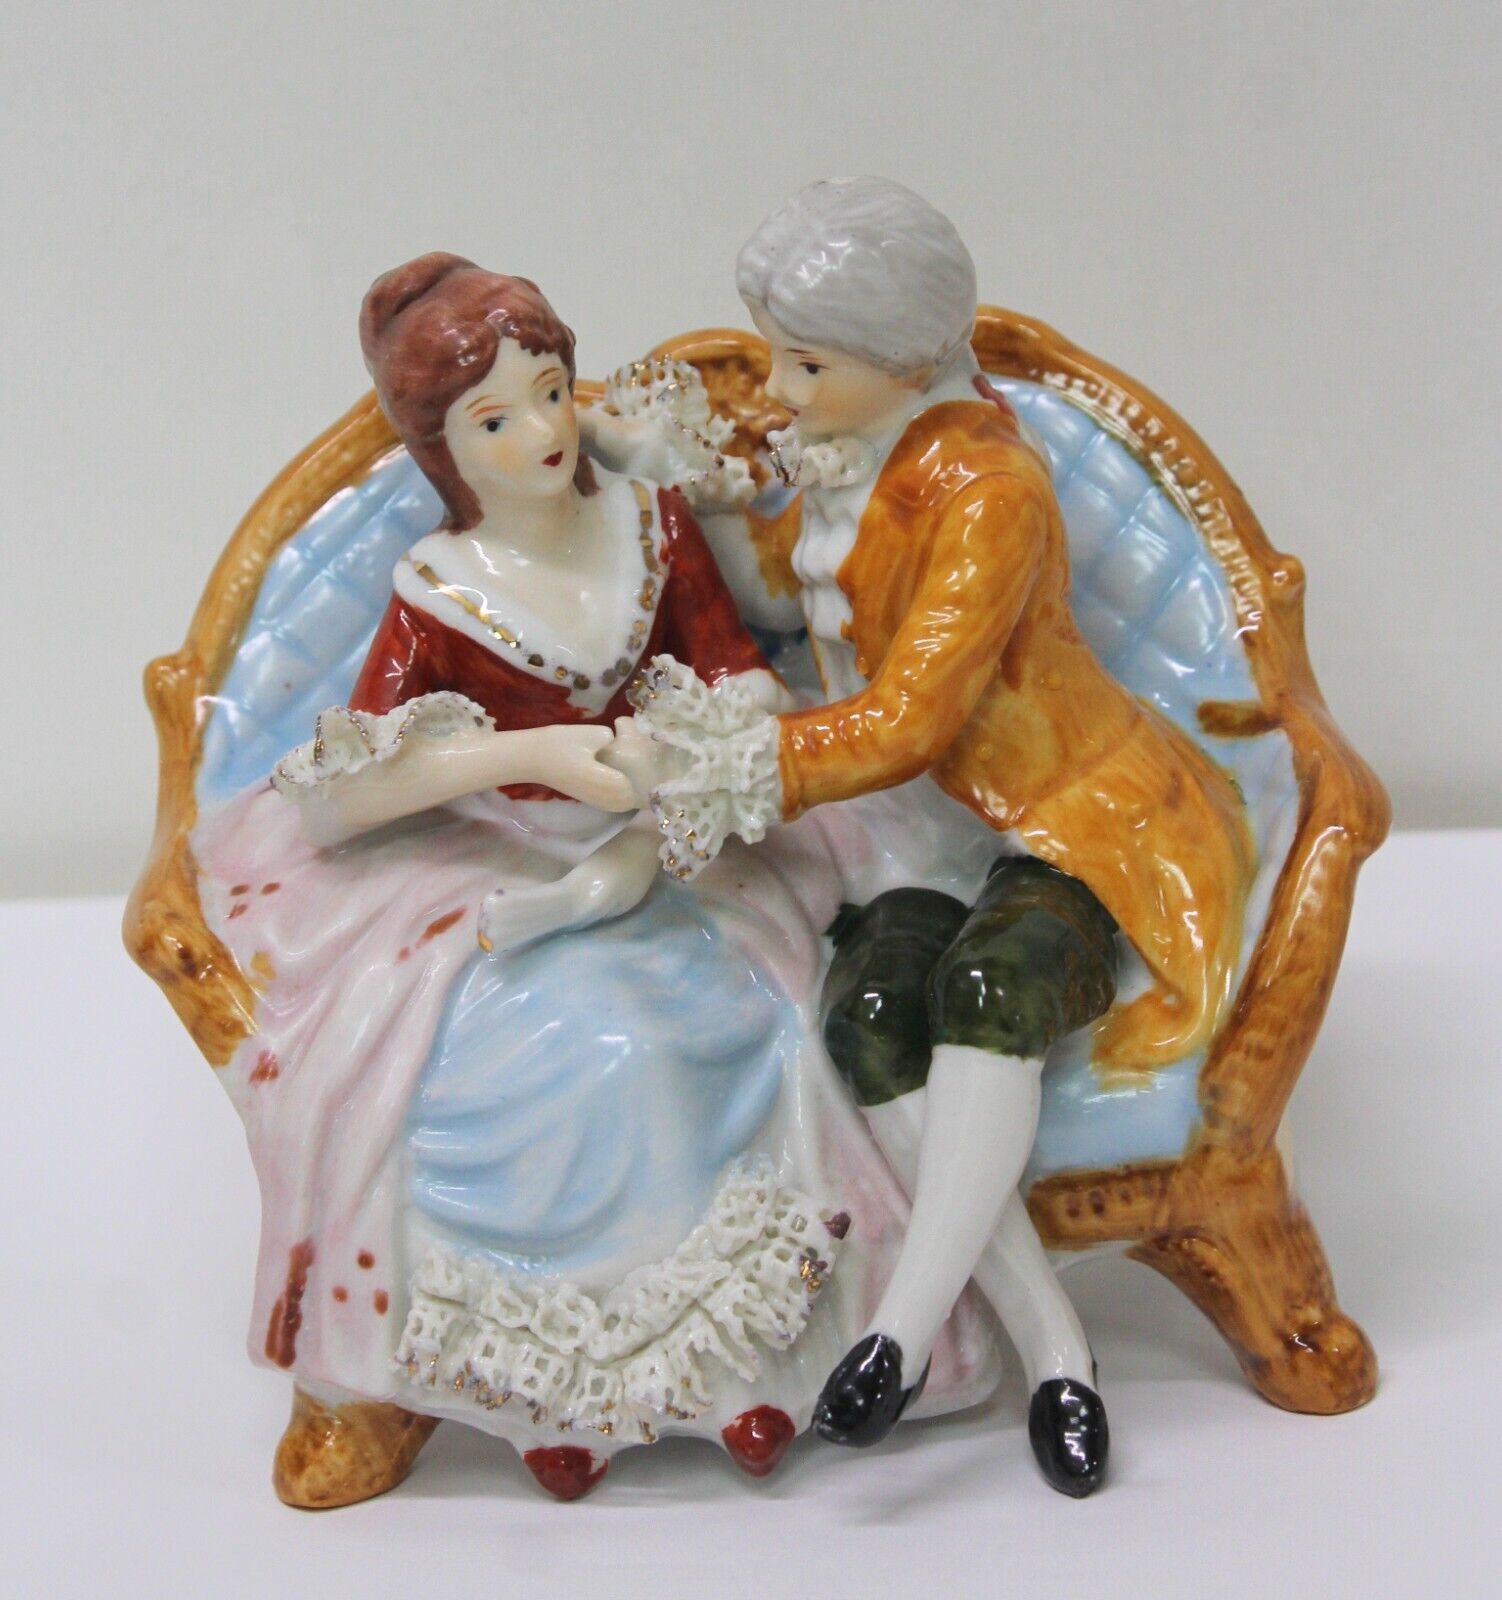 Vintage Ceramic Figurine Victorian Couple Sitting on a Couch